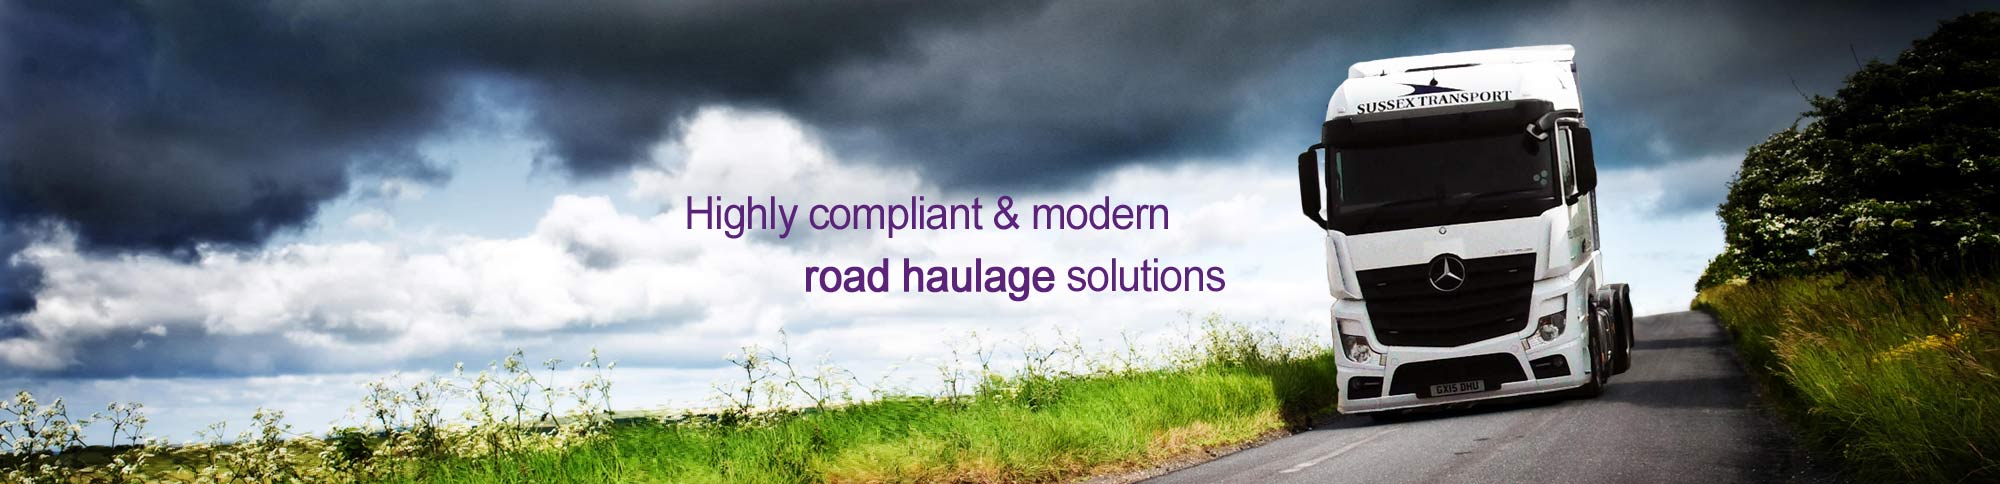 Highly compliant & Modern road haulage solutions